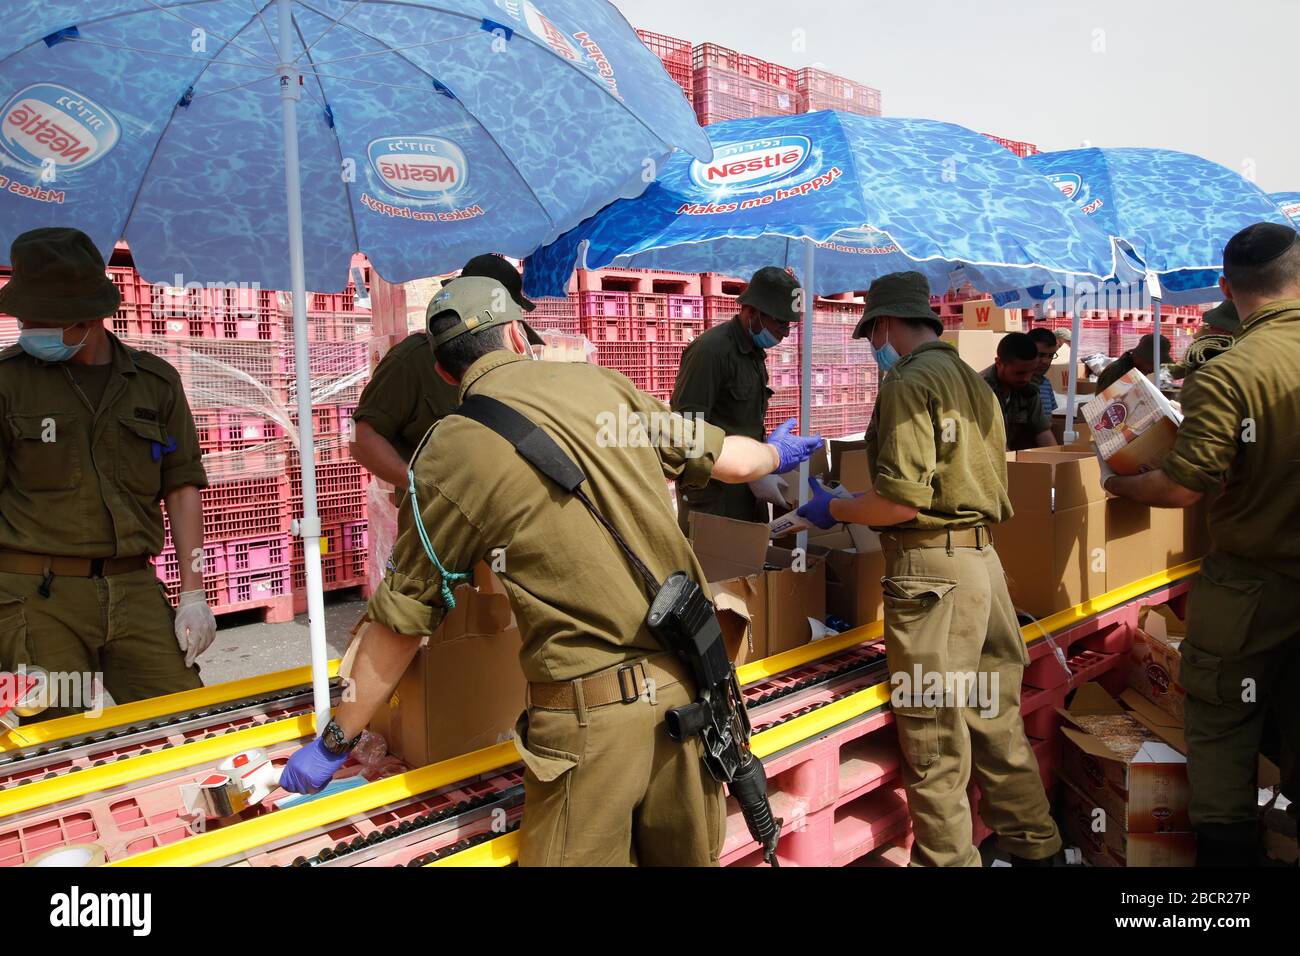 Modiin. 5th Apr, 2020. Israeli soldiers collect and pack for distributing food packages to 350,000 Israeli senior citizens in a logistics center in the central Israeli city of Modiin amid coronavirus pandemic on April 5, 2020. Credit: Gil Cohen Magen/Xinhua/Alamy Live News Stock Photo